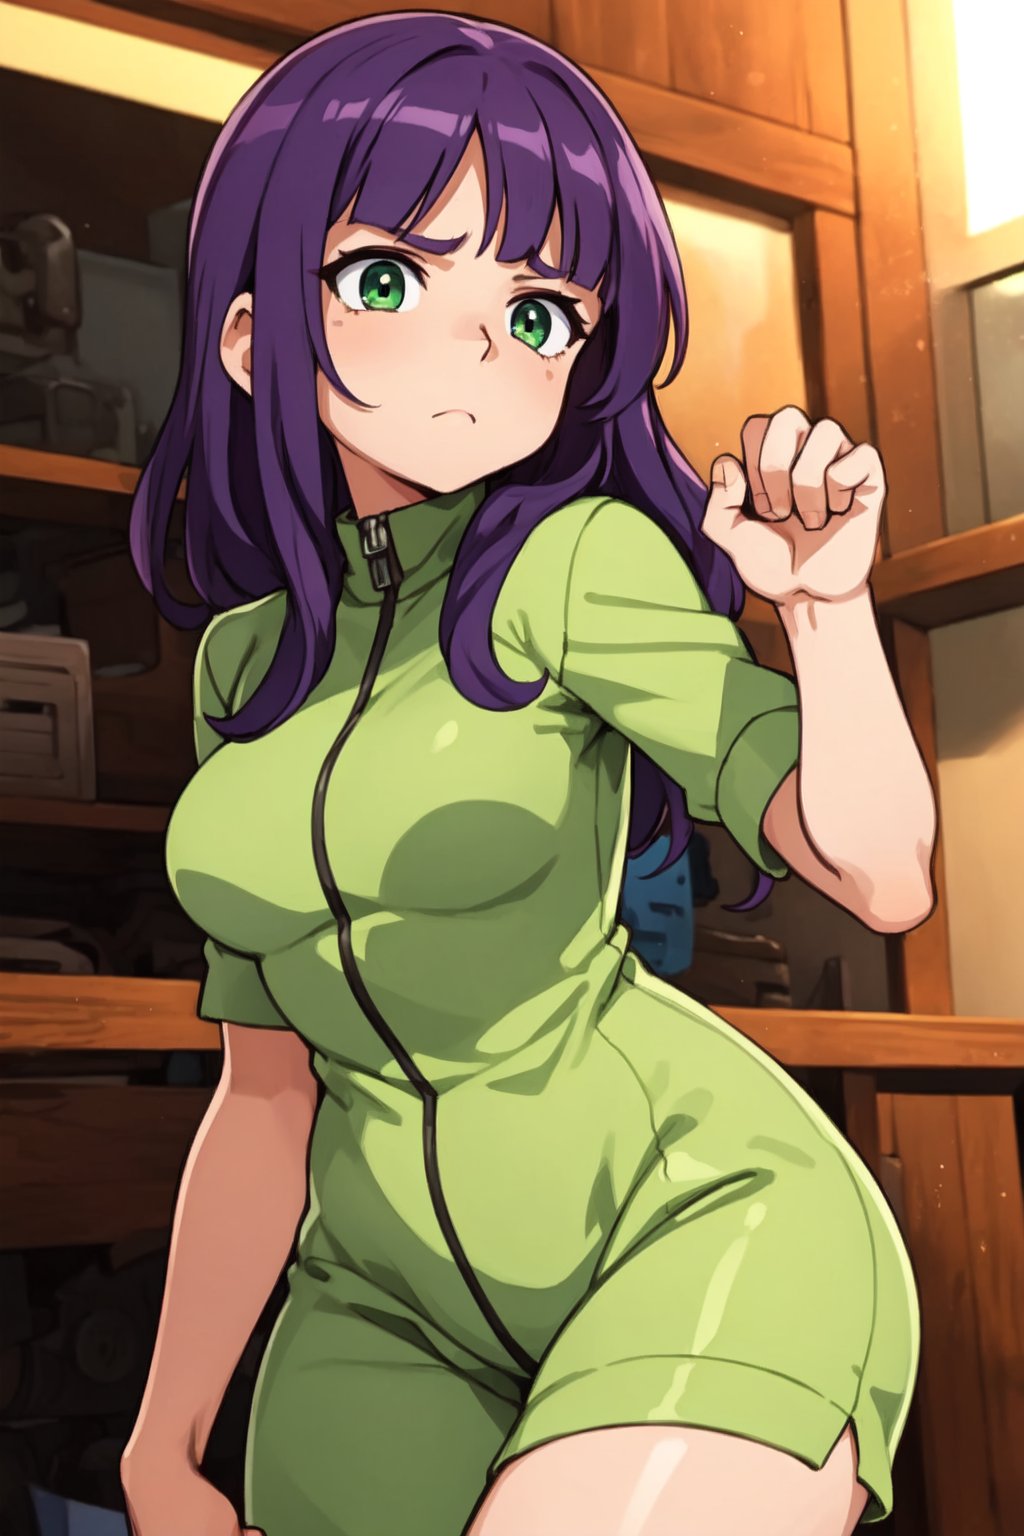 2d,  masterpiece,  best quality,  anime,  highly detailed,  masterpiece  Girl in combenison, Chernobyl exclusion zone, S.T.A.L.K.E.R, purple hair, green eyes, scar above her left eyebrow, unarmed, five fingers on her left hand, five fingers on her right hand, sad.